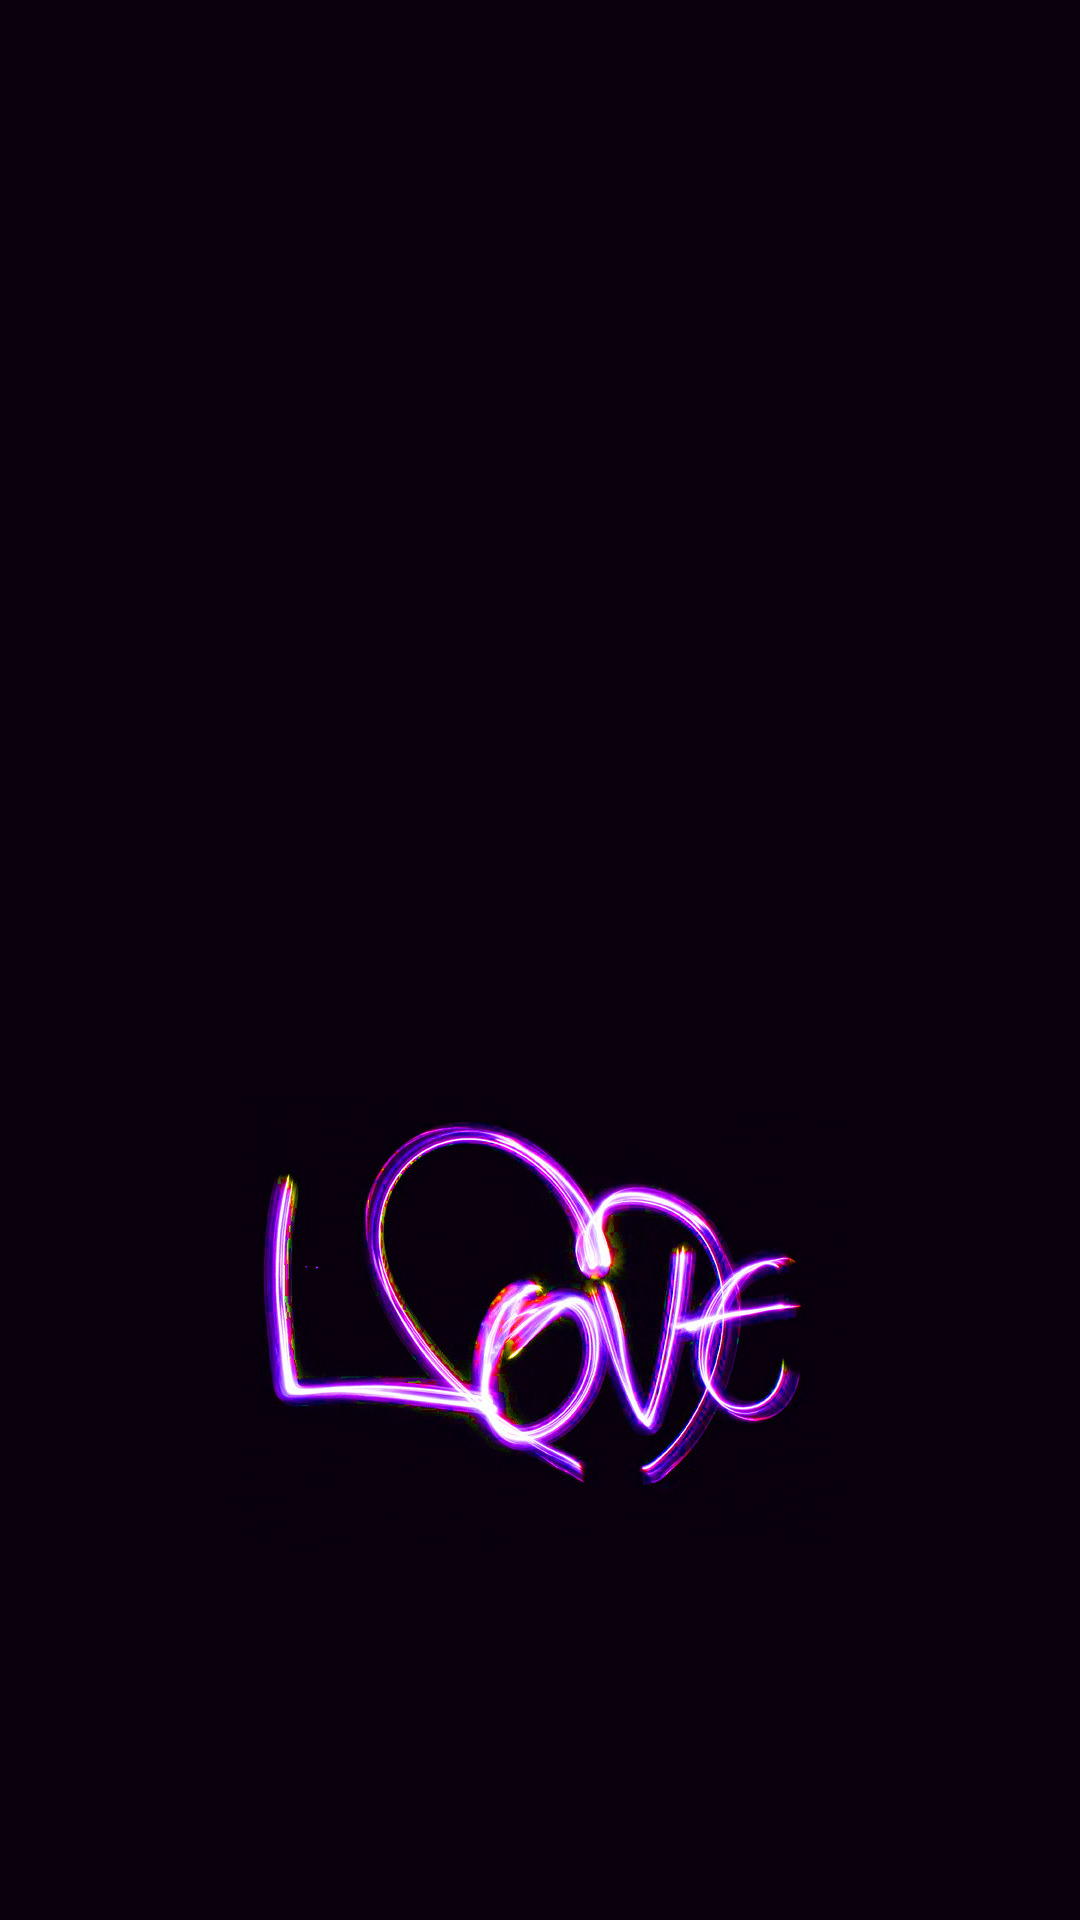 Love Images Wallpaper For Mobile - Word Love , HD Wallpaper & Backgrounds